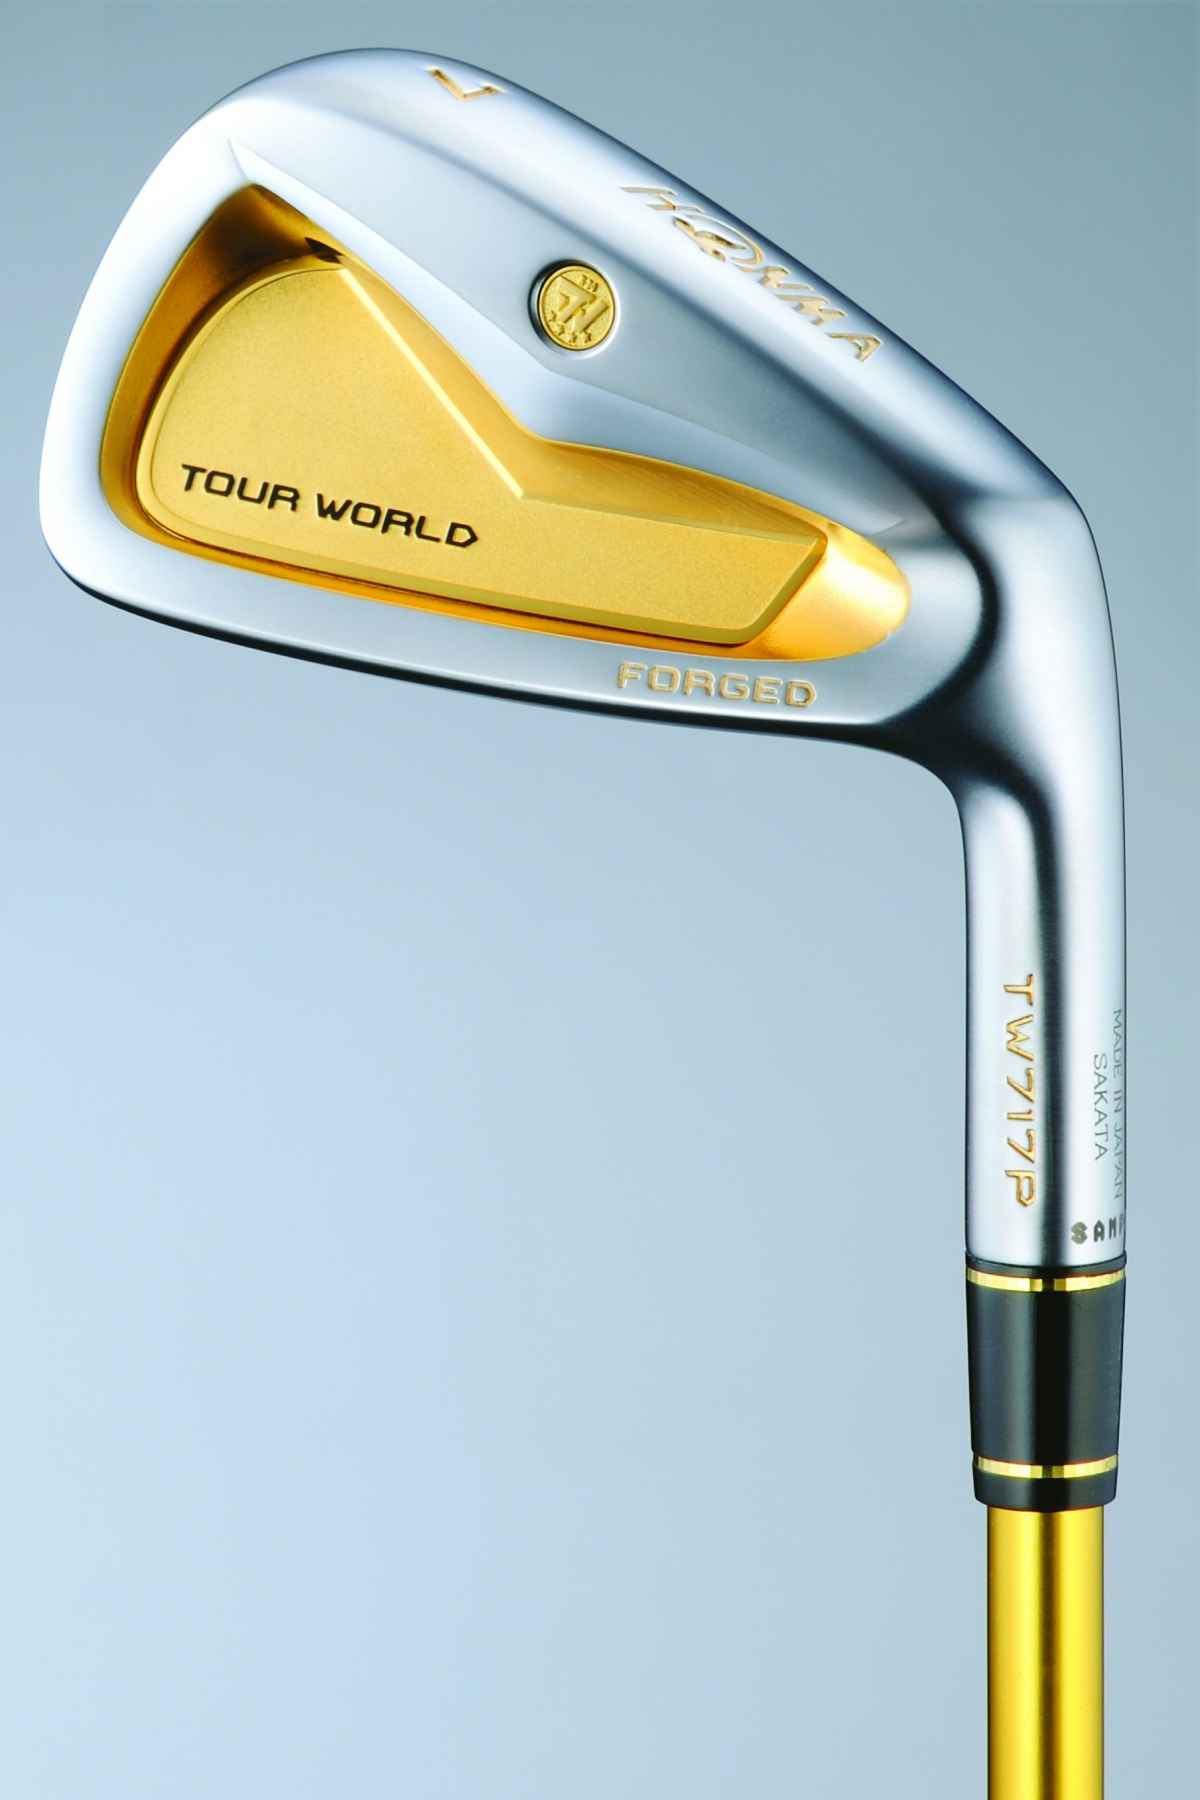 2013's three most expensive irons